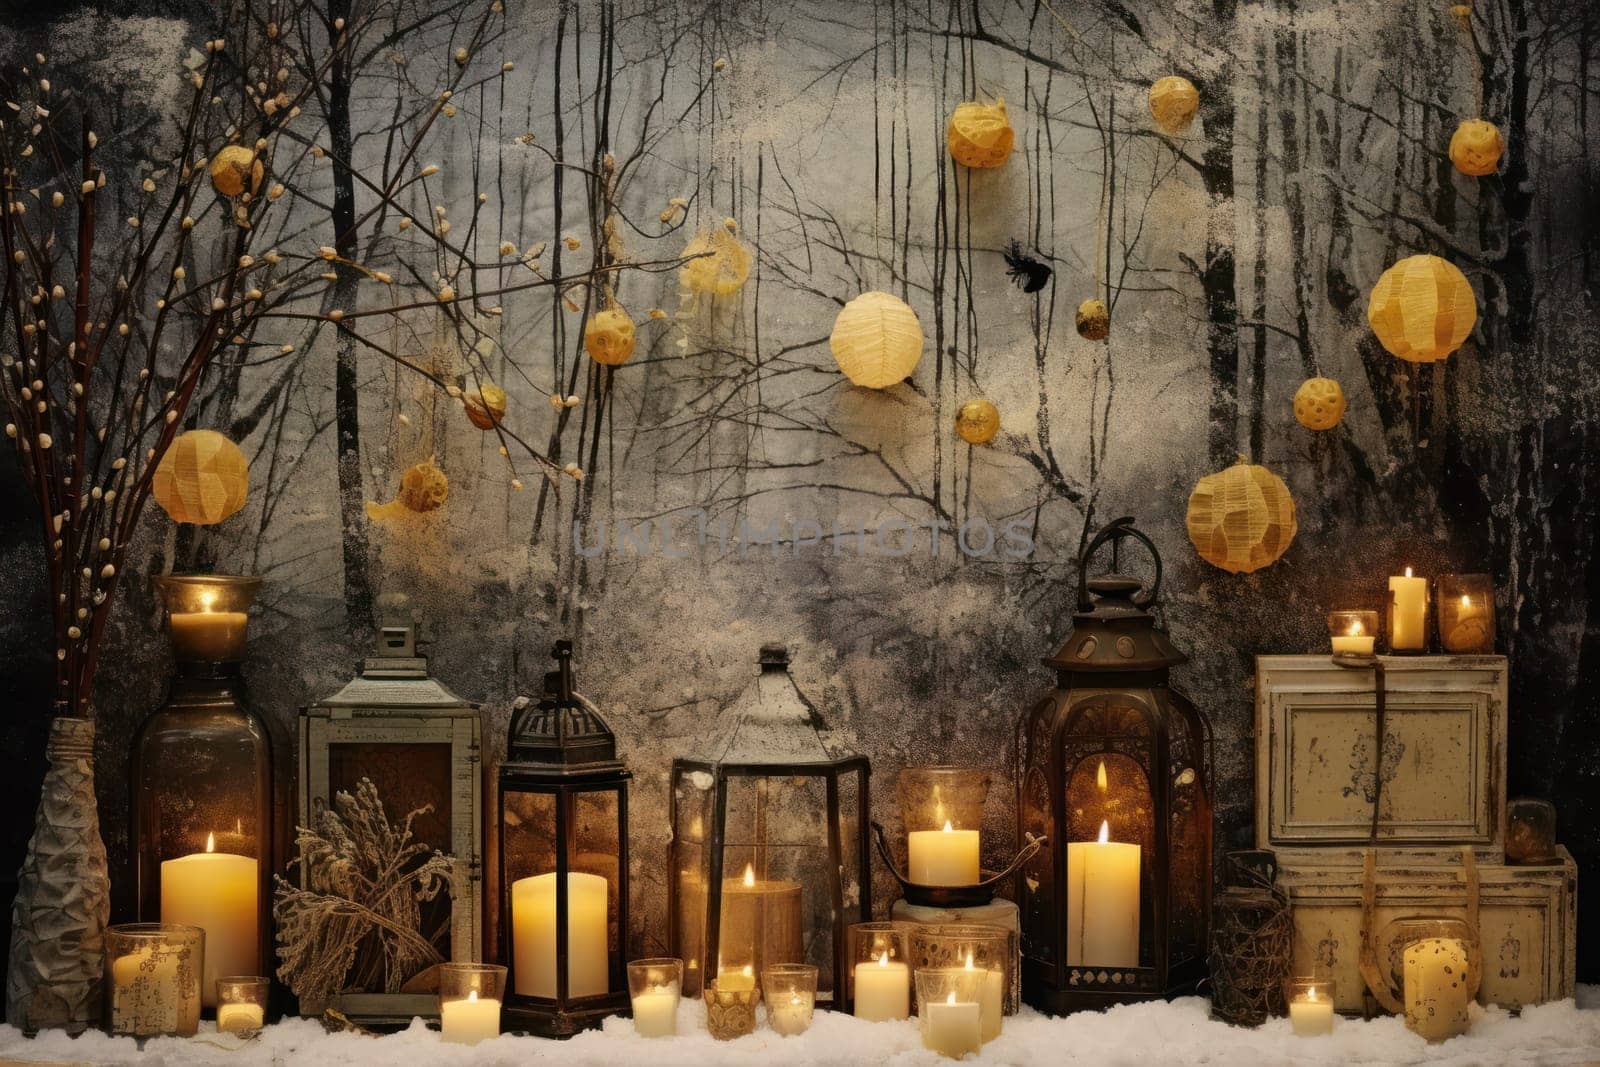 A captivating portrayal of the winter charm, focusing on the creation of cozy and welcoming visuals using the soft glow of candles or lanterns against the snowy backdrop.